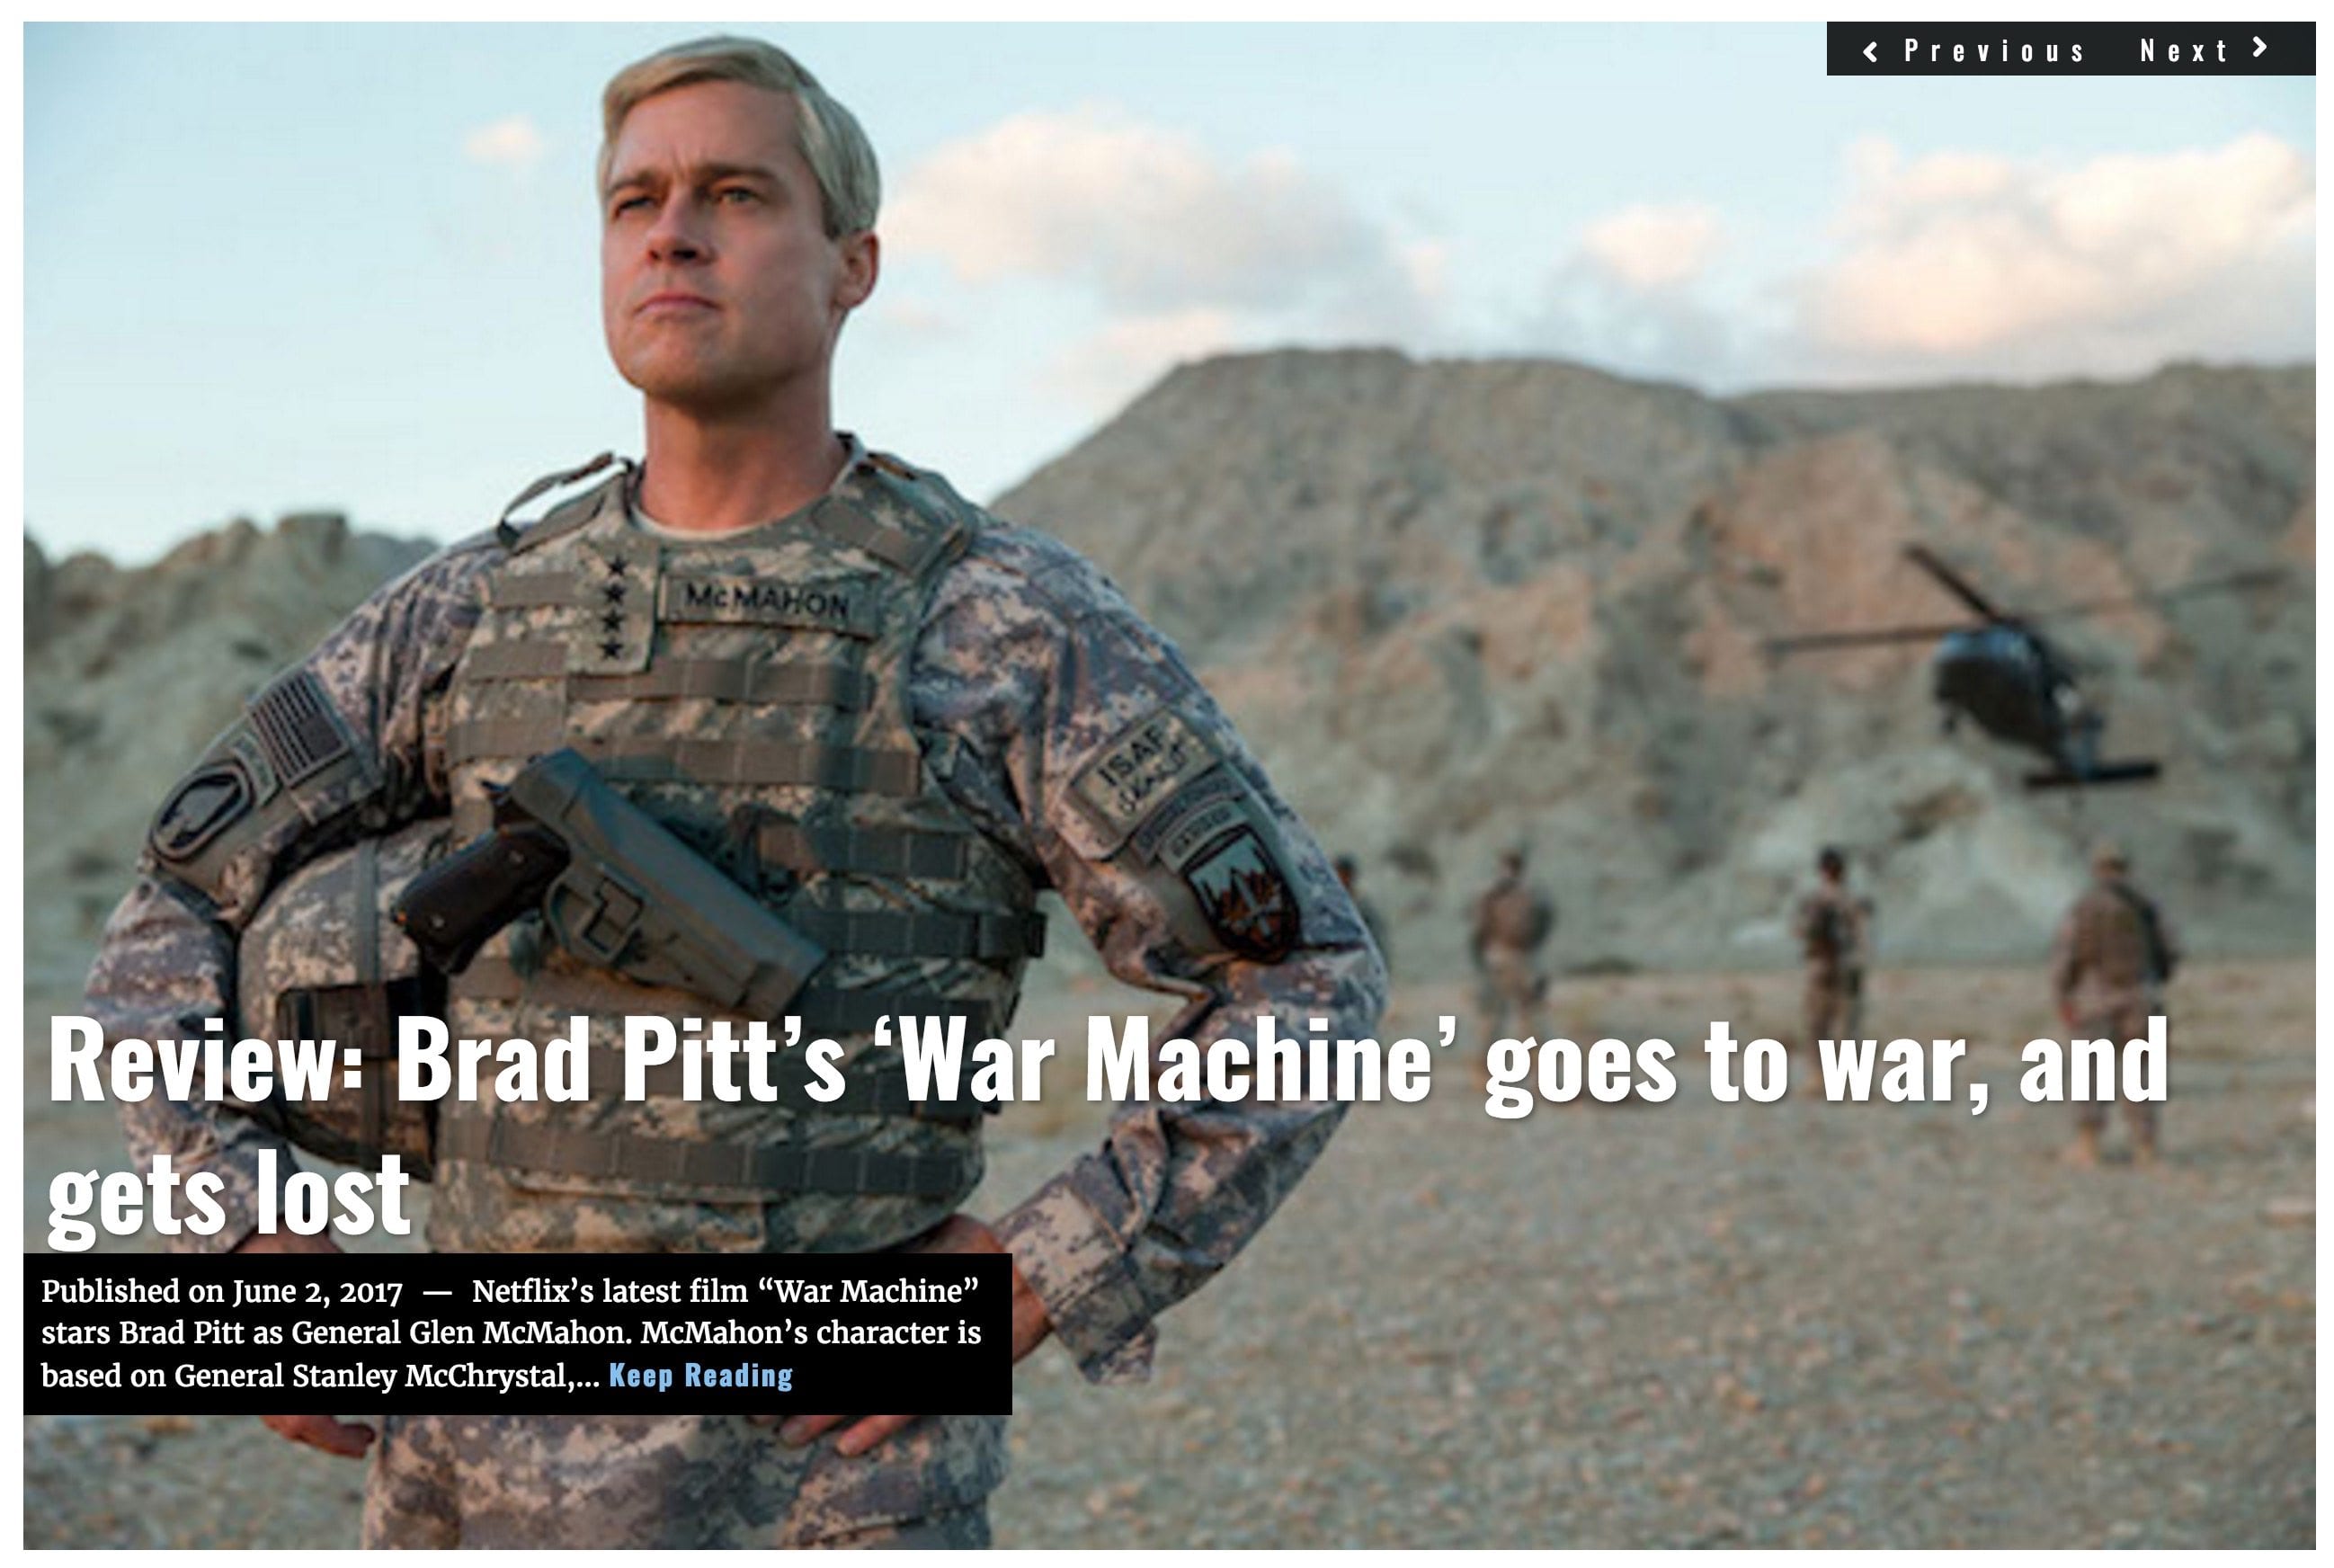 Image Lima Charlie News headline June 2, 2017 'Review: Brad Pitt's War Machine goes to war, and gets lost'